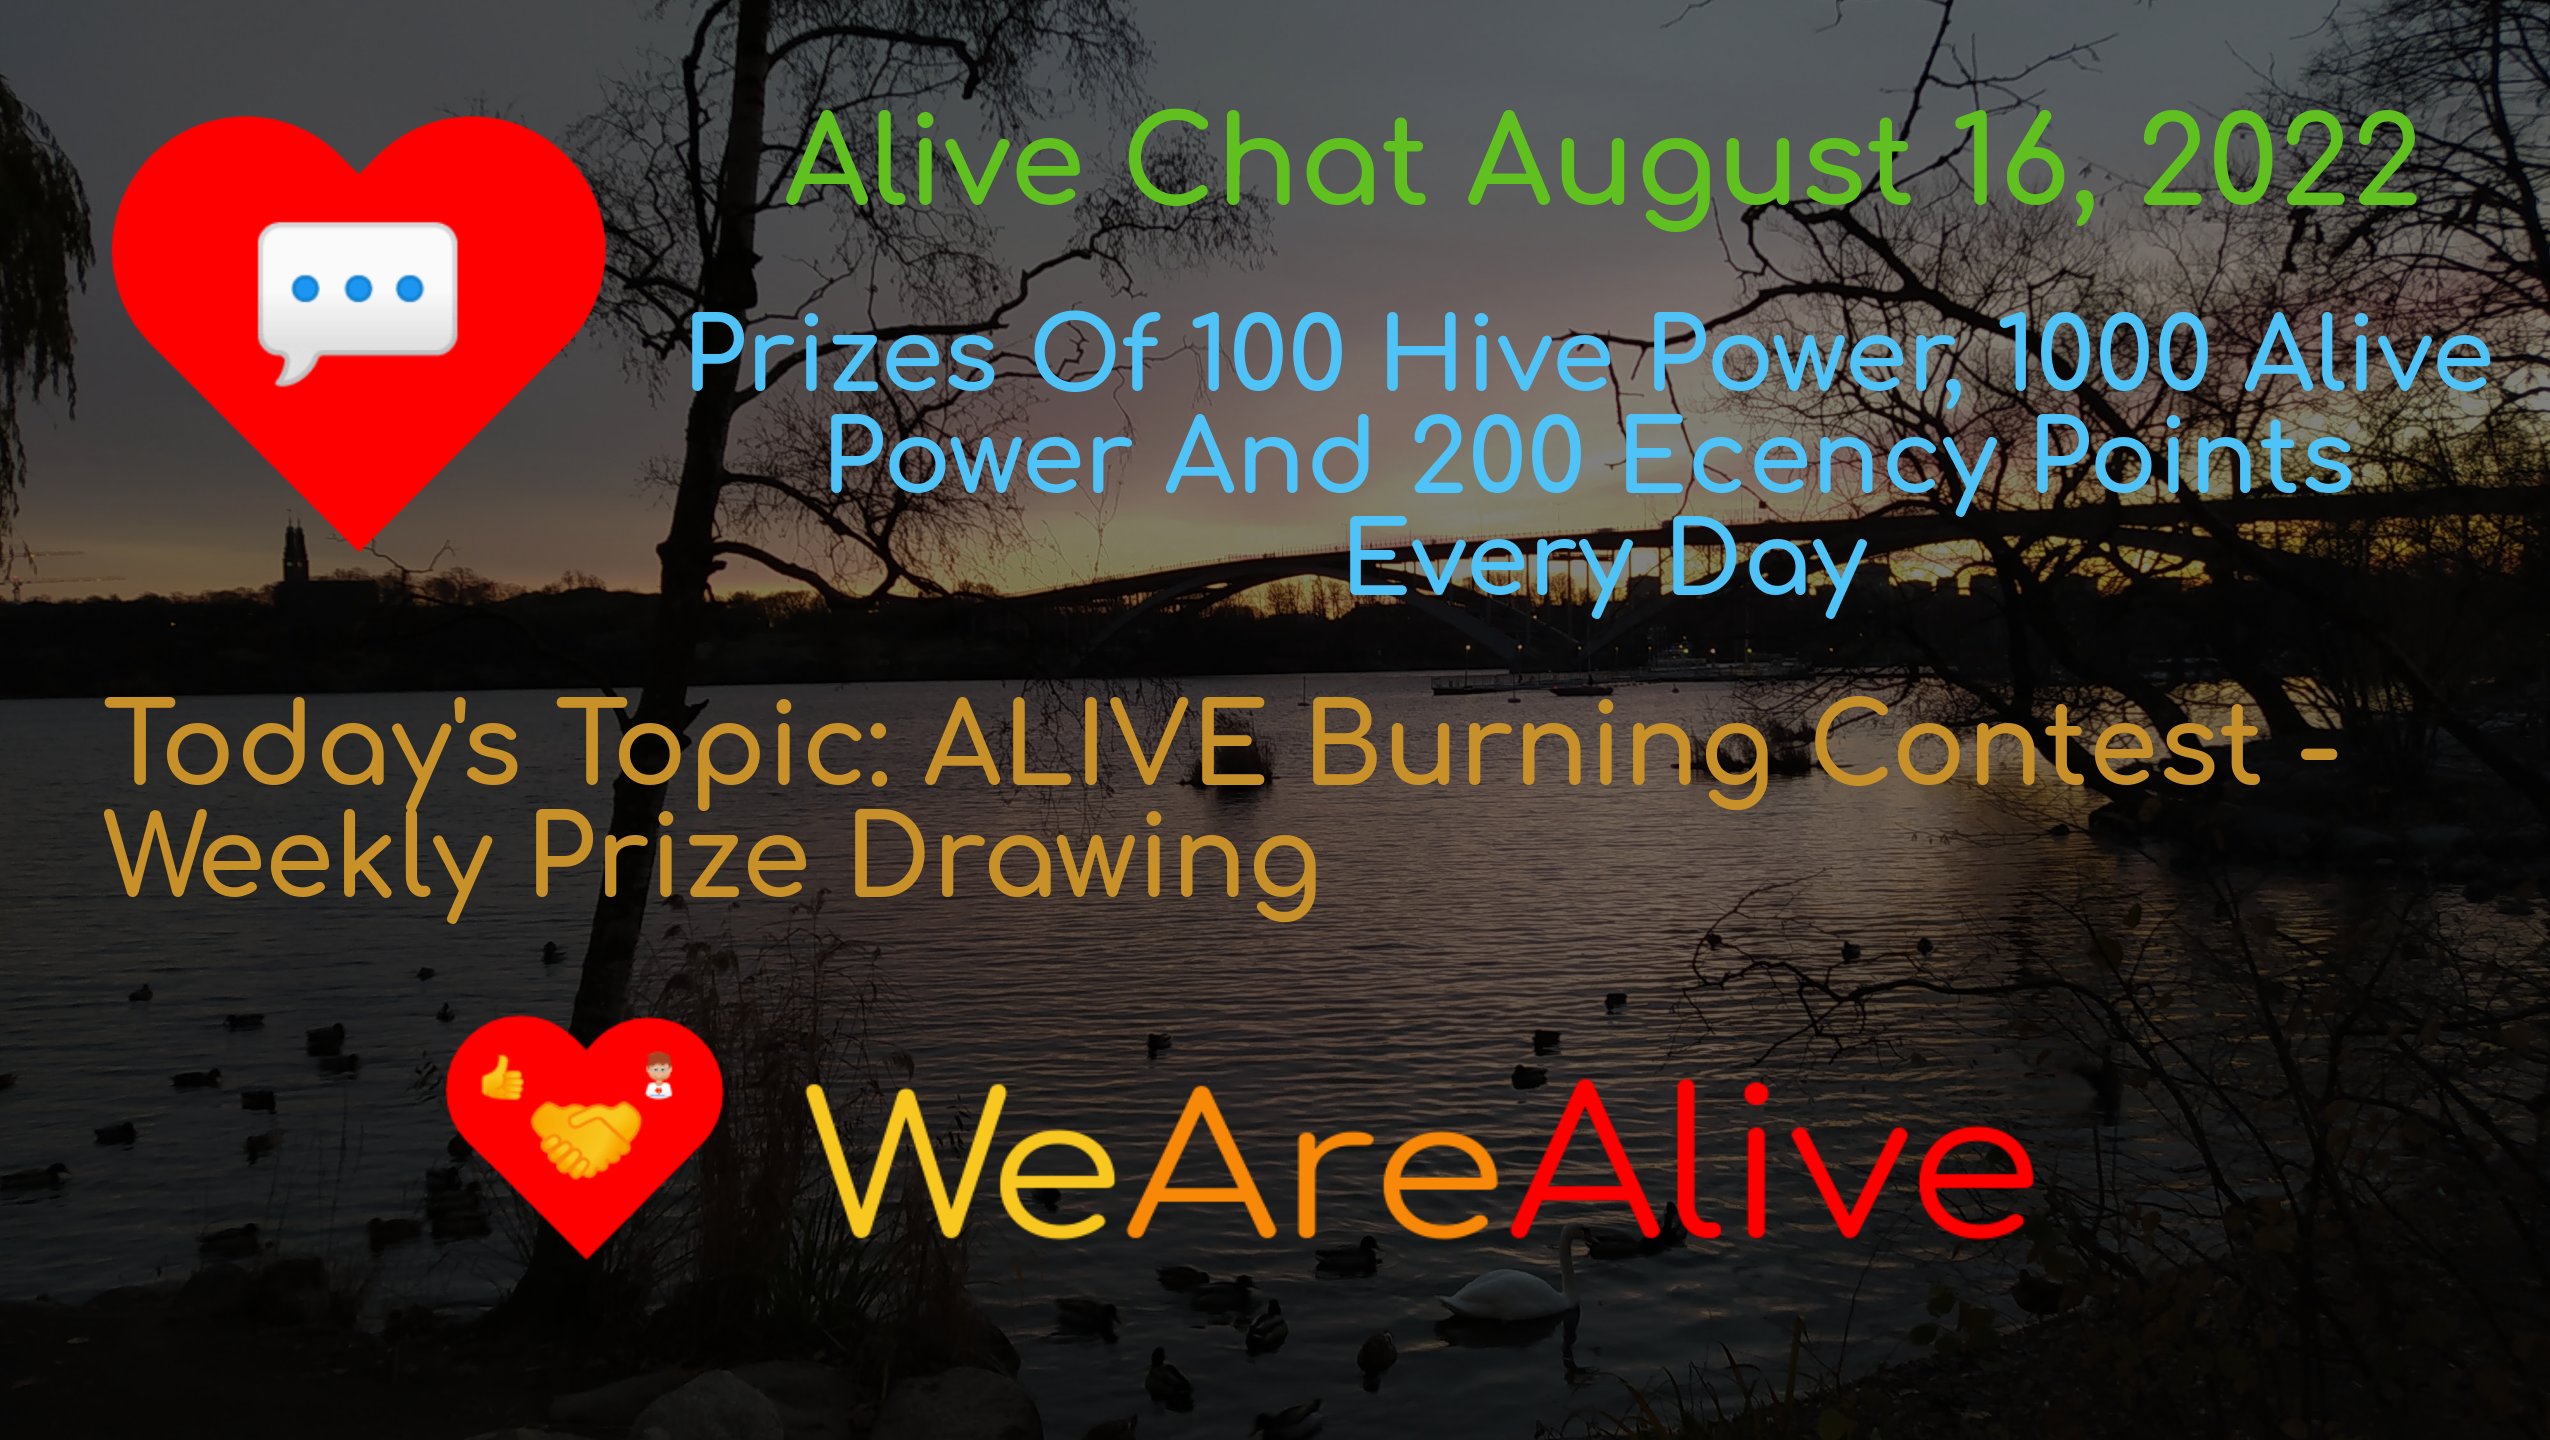 @alive.chat/alive-chat-august-16-2022-daily-prize-drawing-open-for-entries-todays-topic-alive-burning-contest-weekly-prize-drawing